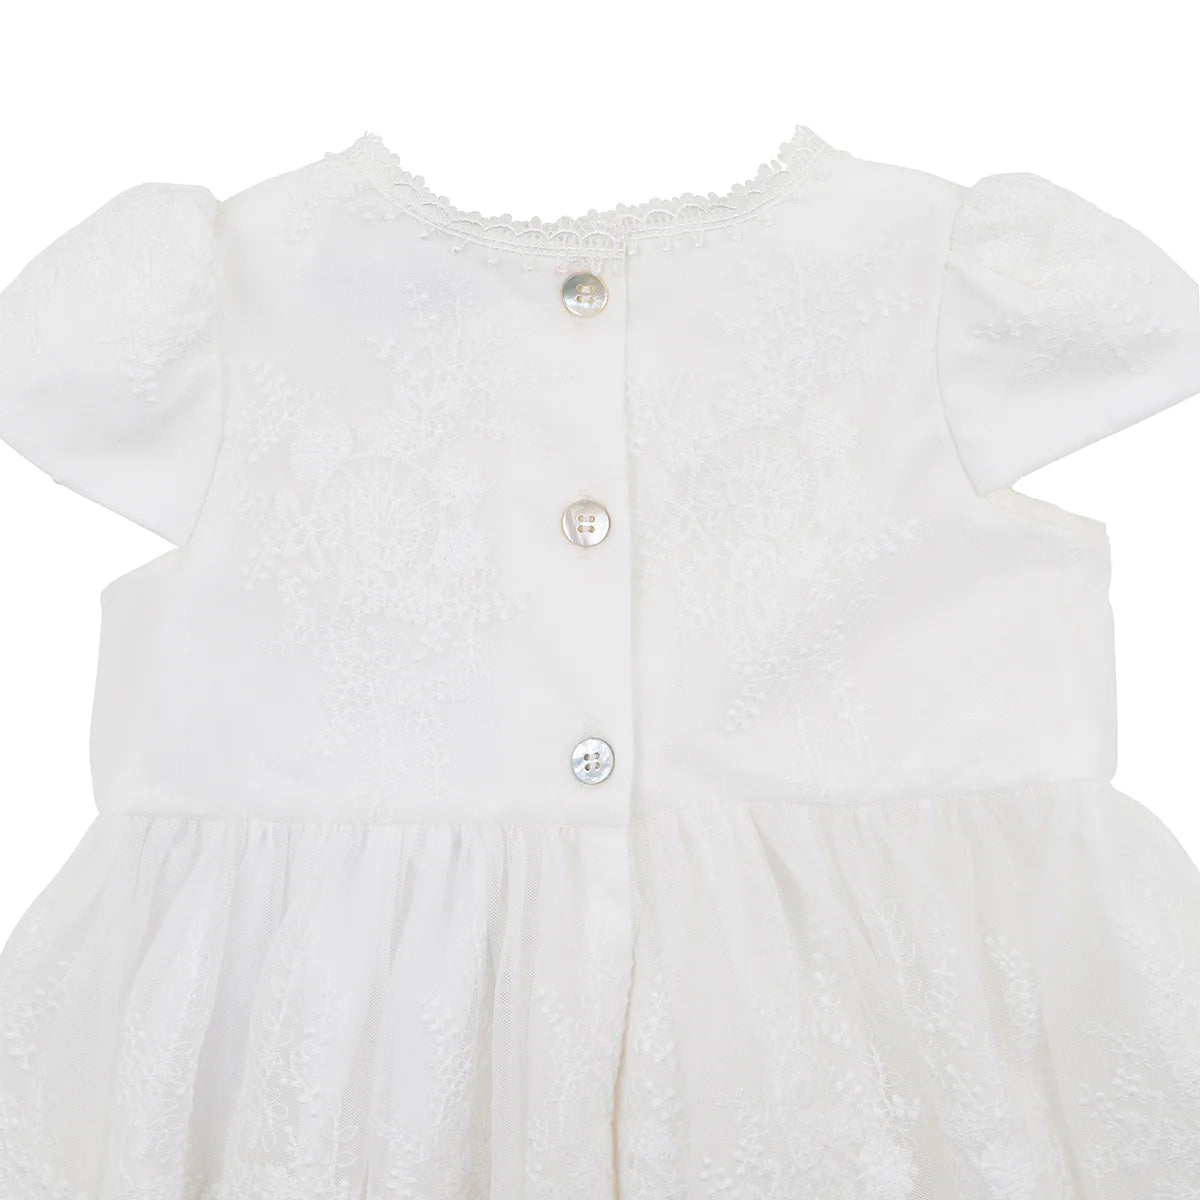 OPEN BACK CHRISTENING DRESS WITH BLOOMER